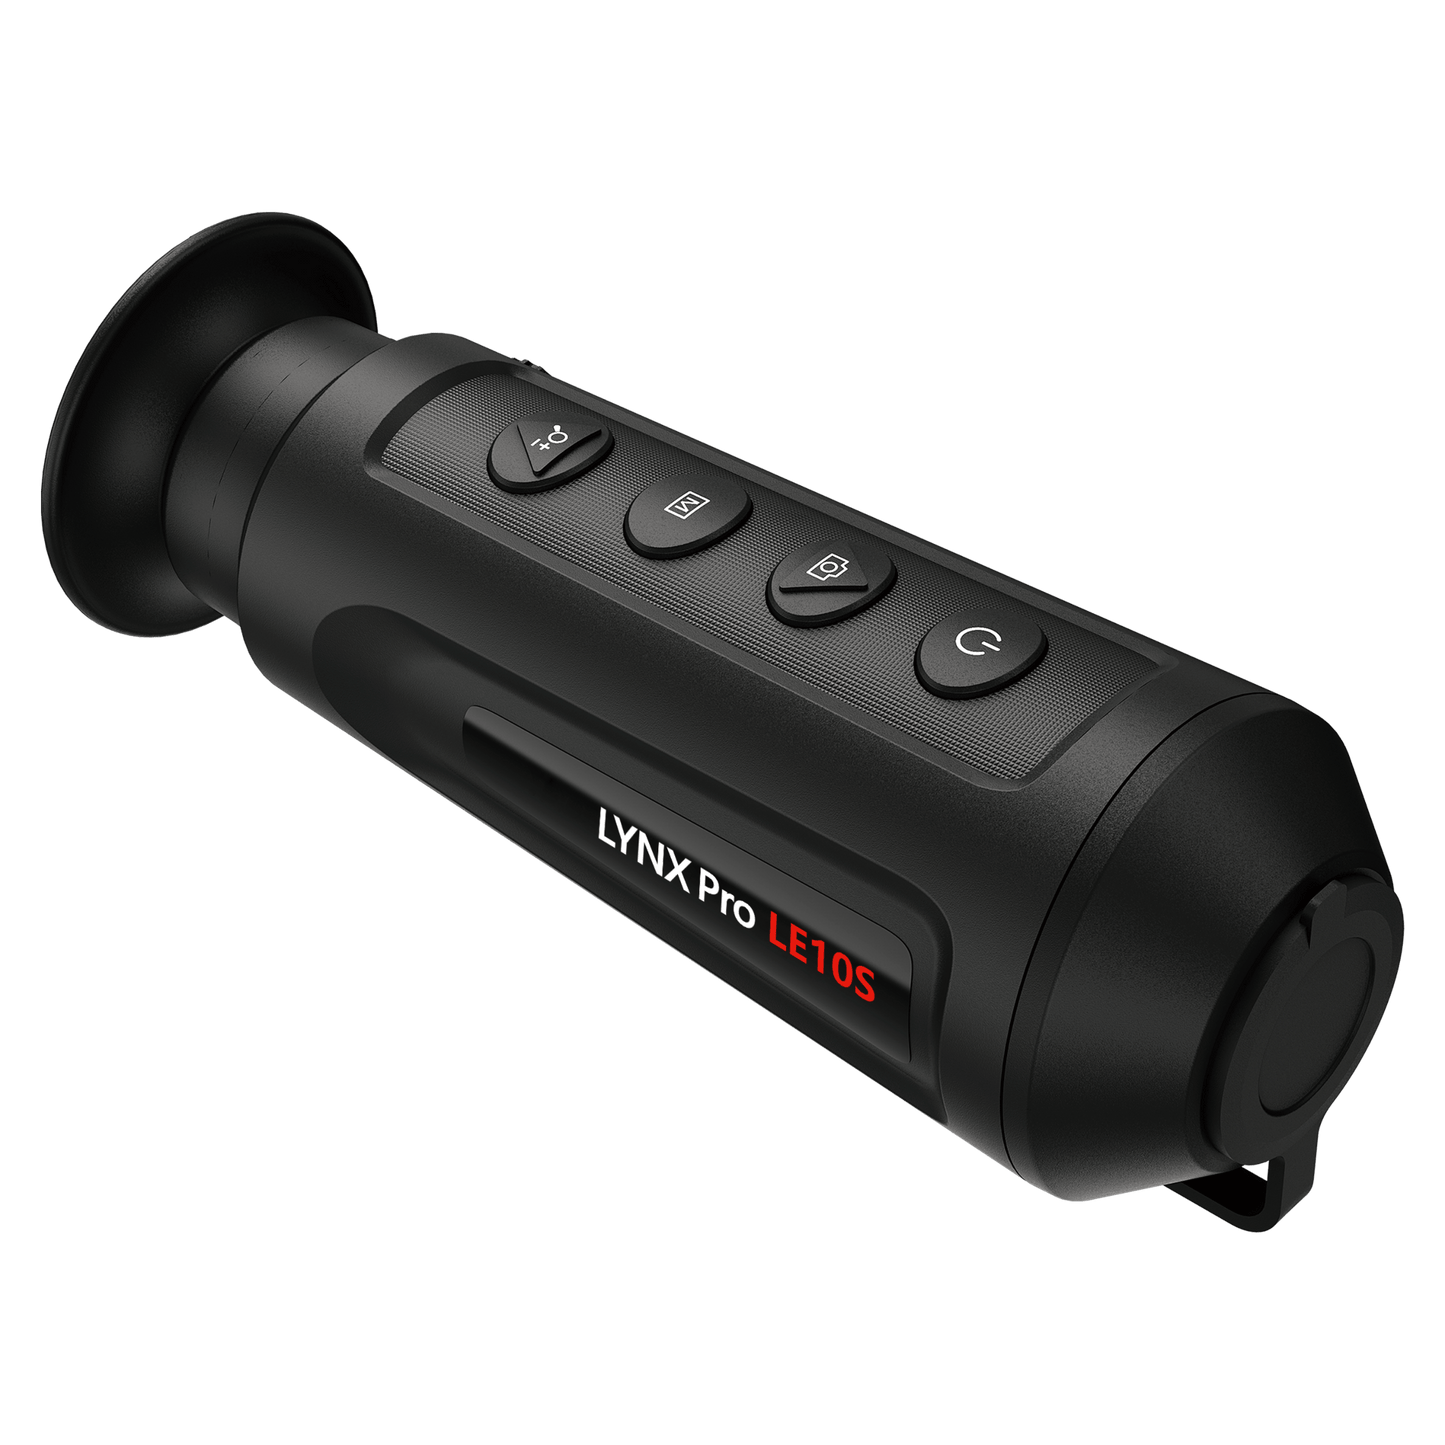 Lynx Pro LE10S Thermal Monocular front right view showing product variant